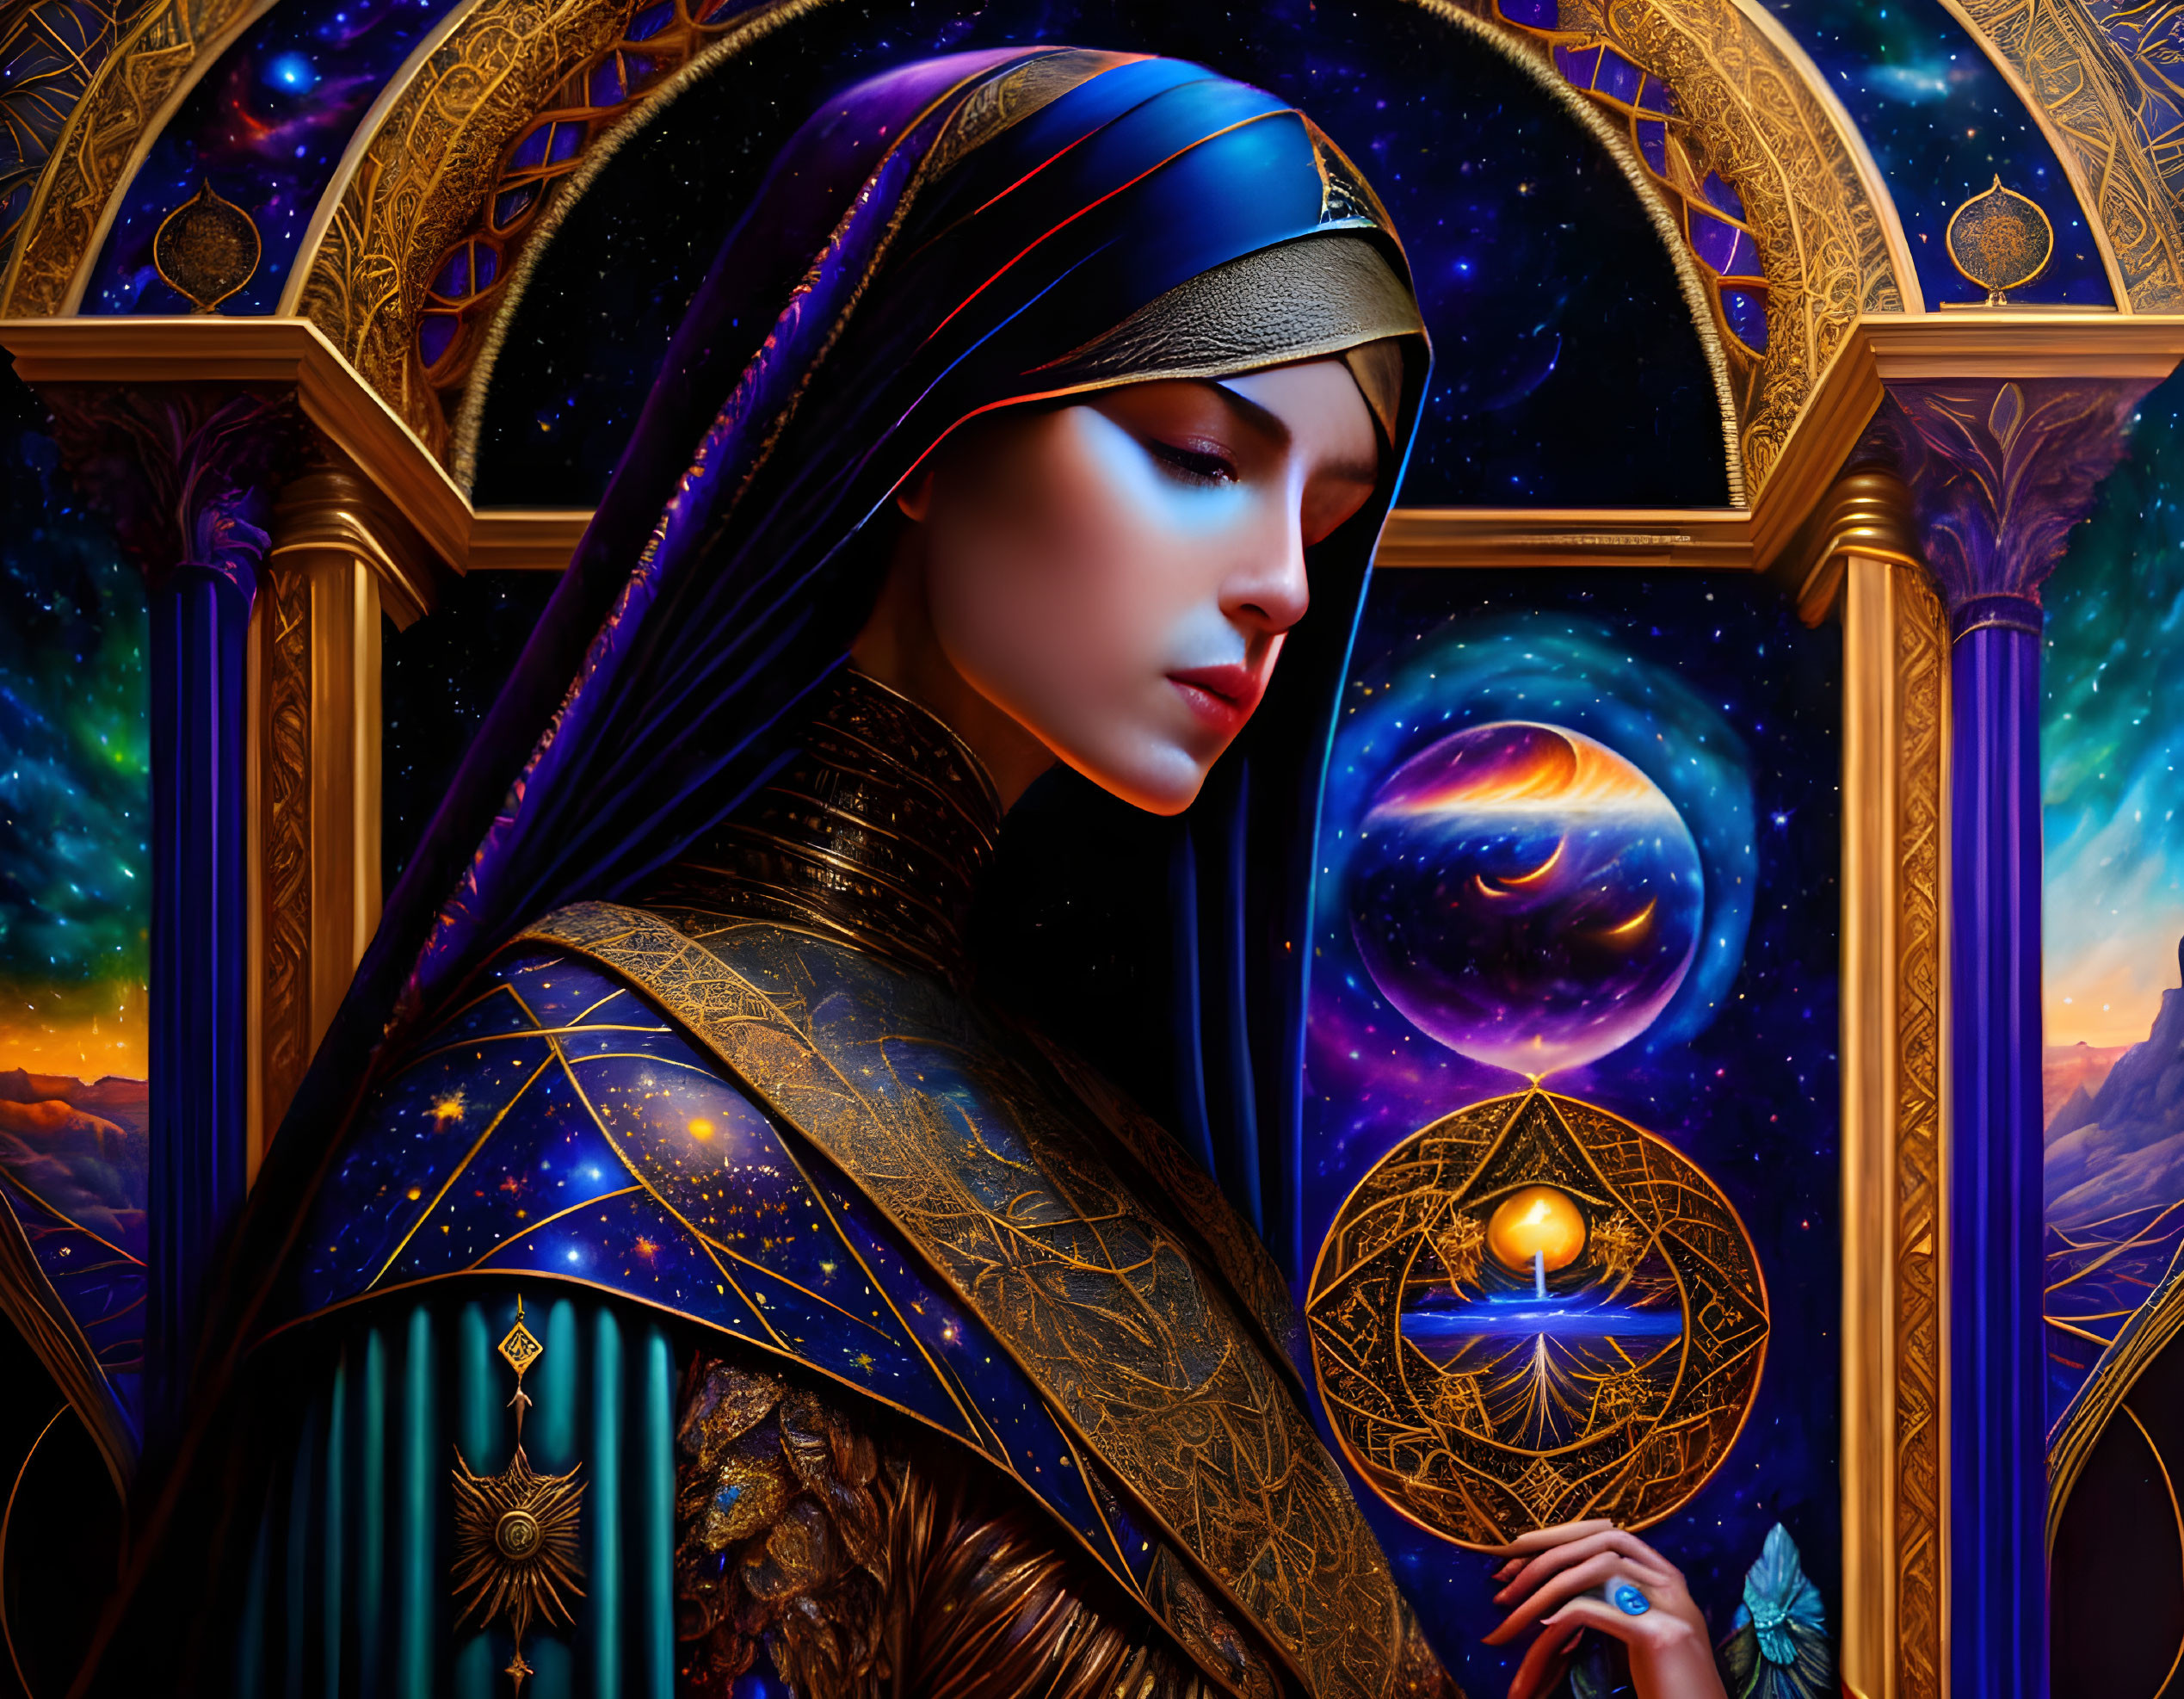 Celestial-themed woman portrait with cosmic background and ornate star attire.